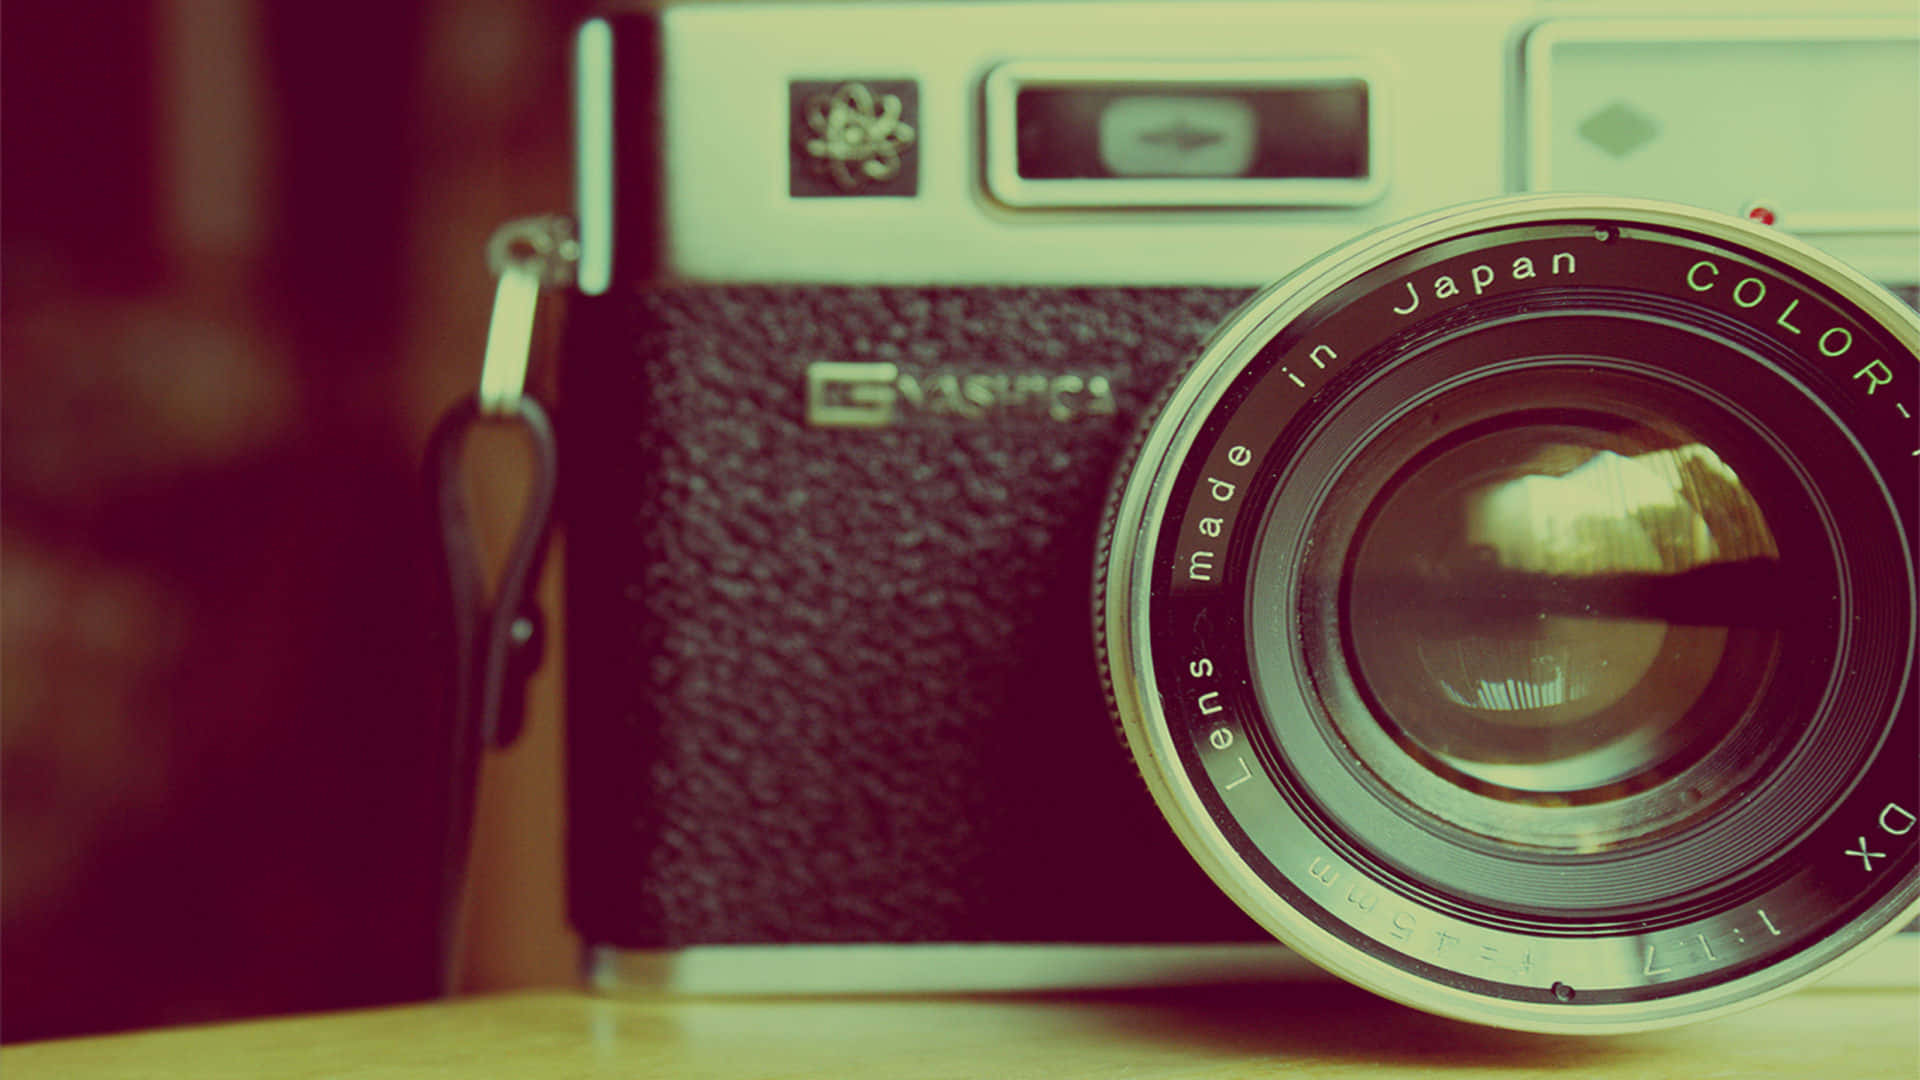 "capturing Time: A Vintage Camera’s View" Wallpaper